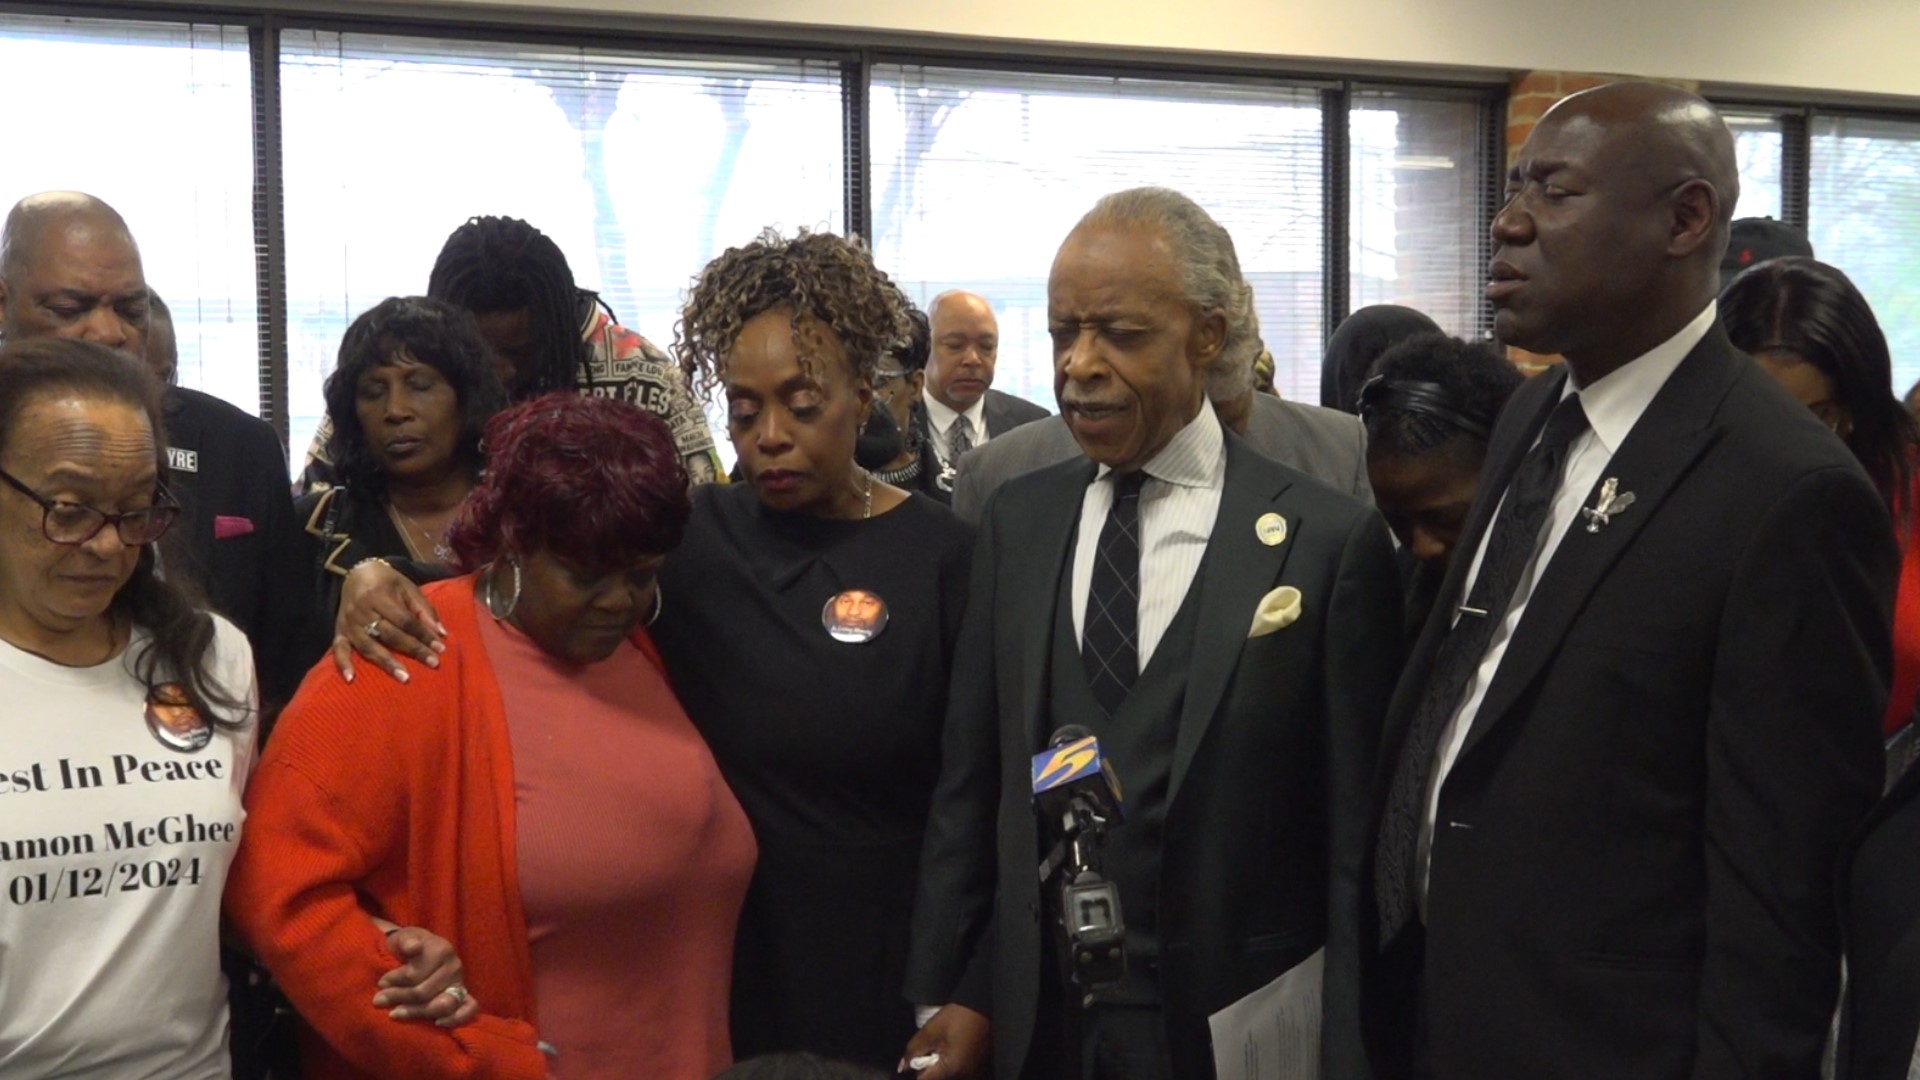 Emotions were high as national civil rights activist Reverend Al Sharpton and Attorney Ben Crump stood beside the family of Ramon McGhee for his memorial service.